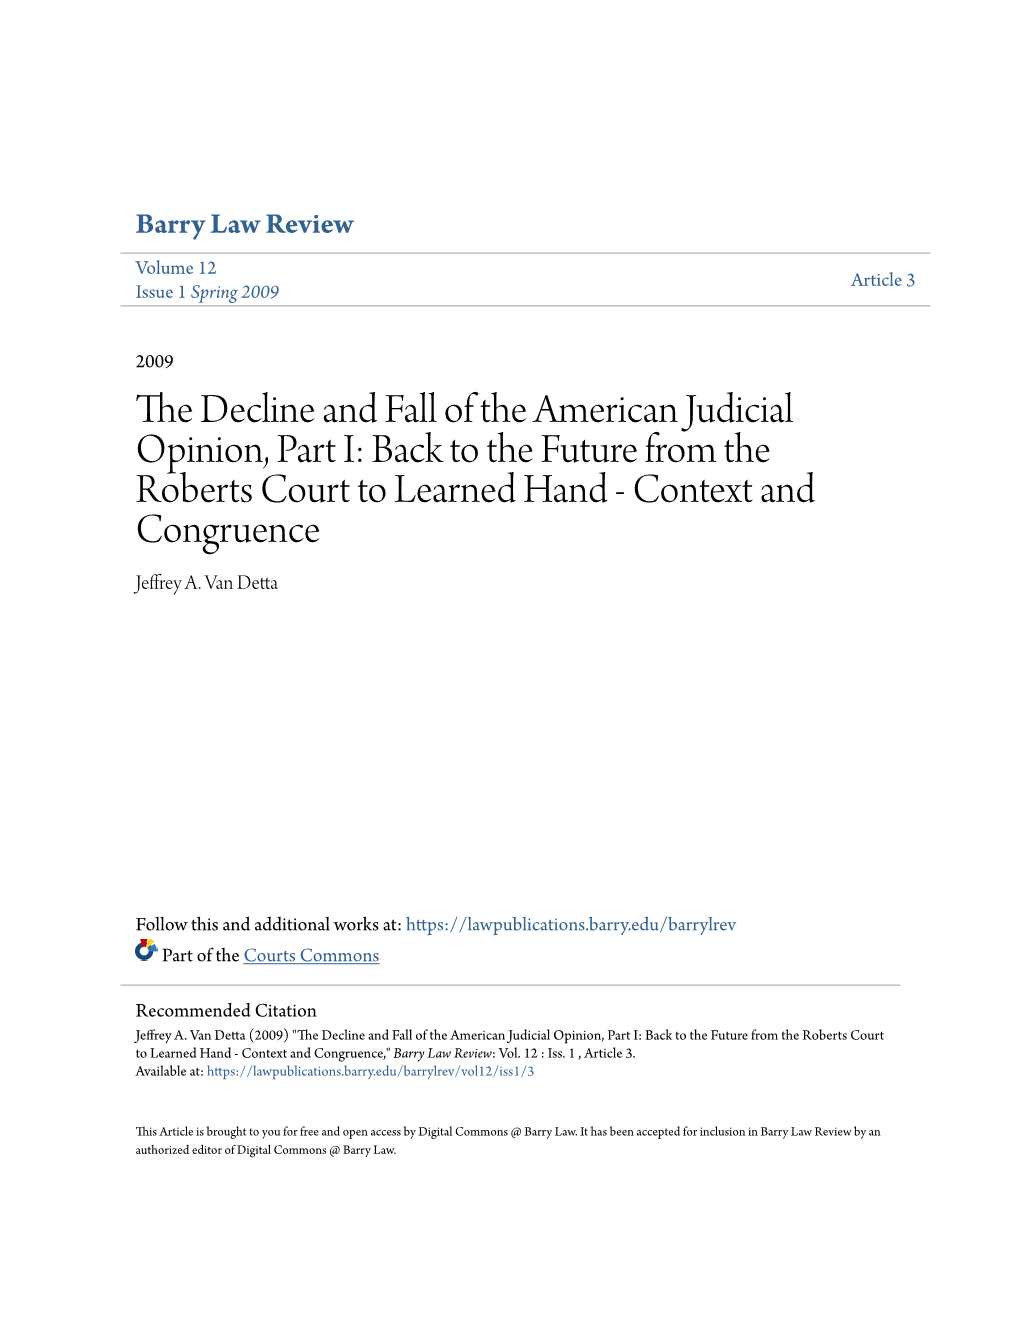 The Decline and Fall of the American Judicial Opinion, Part I: Back to the Future from the Roberts Court to Learned Hand - Context and Congruence